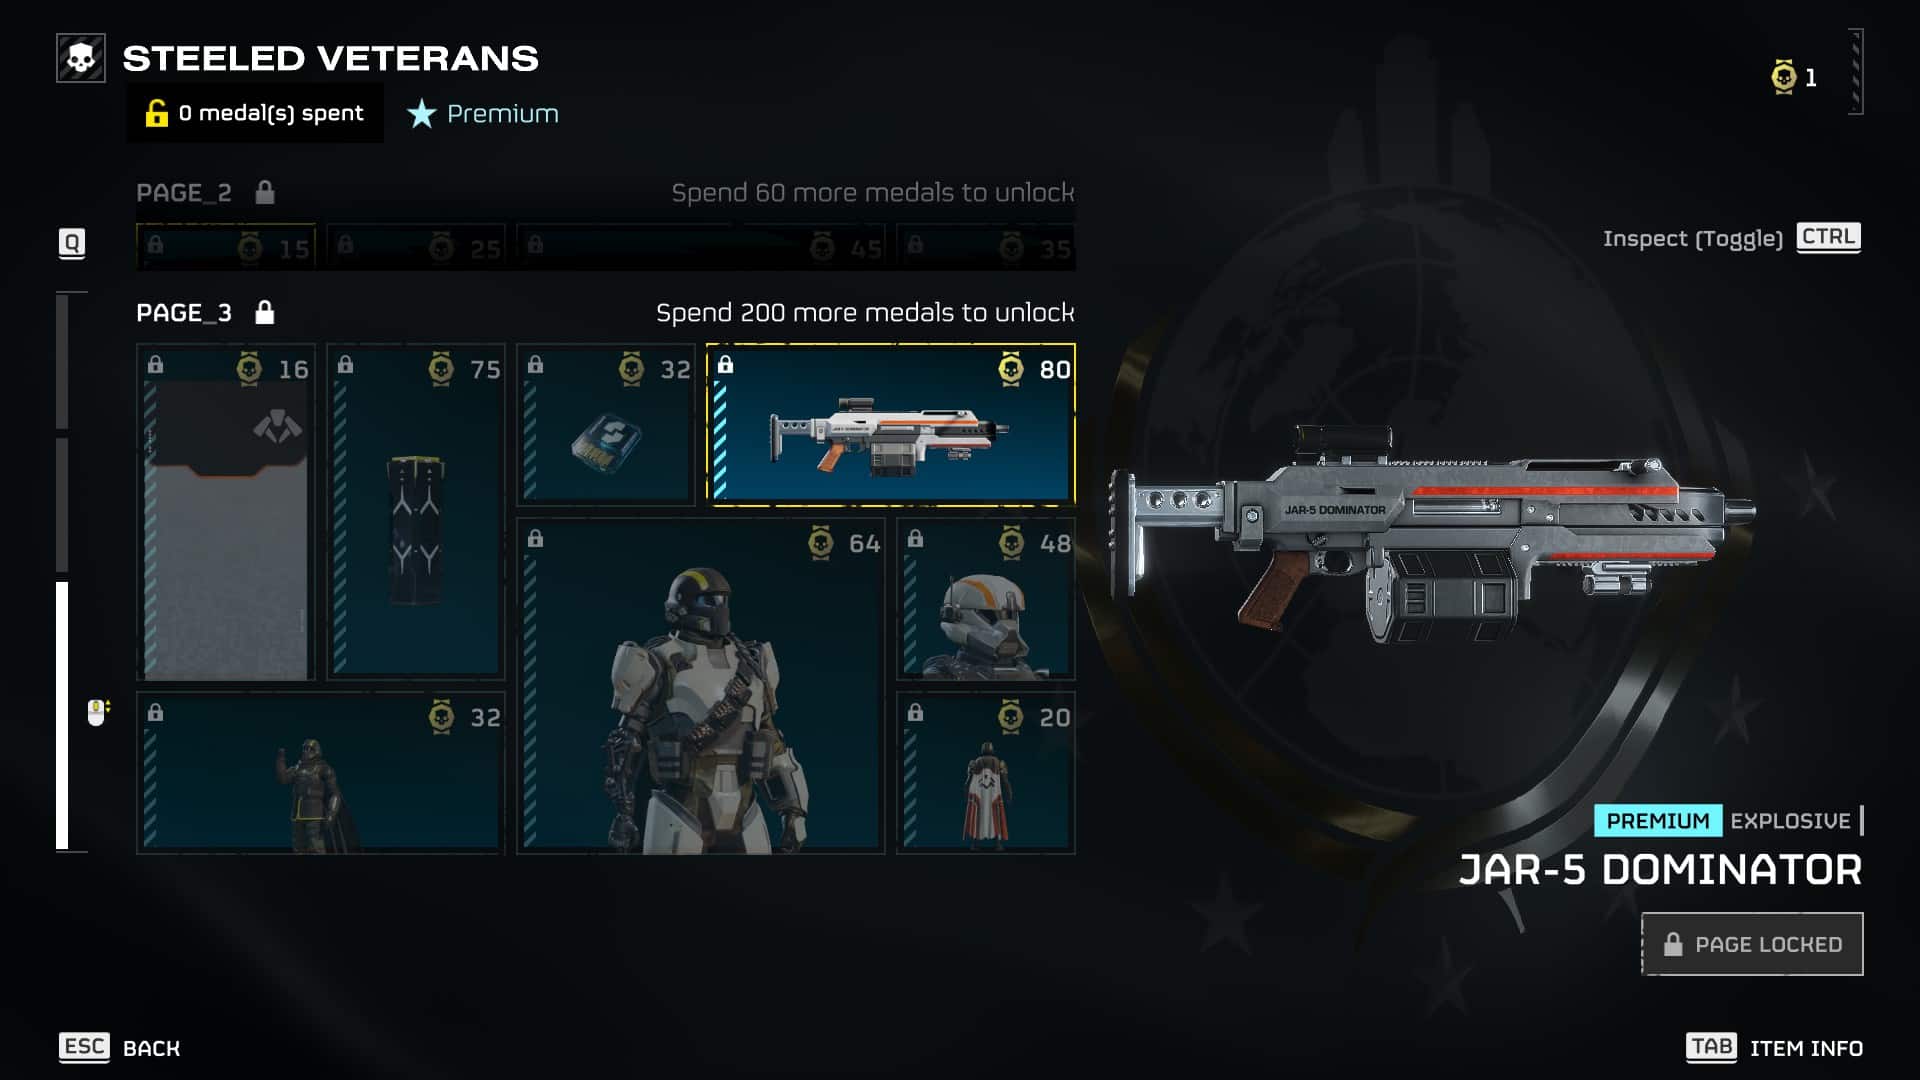 Helldivers 2 JAR-5 Dominator: The JAR-5 Dominator in the Steeled Veterans store.